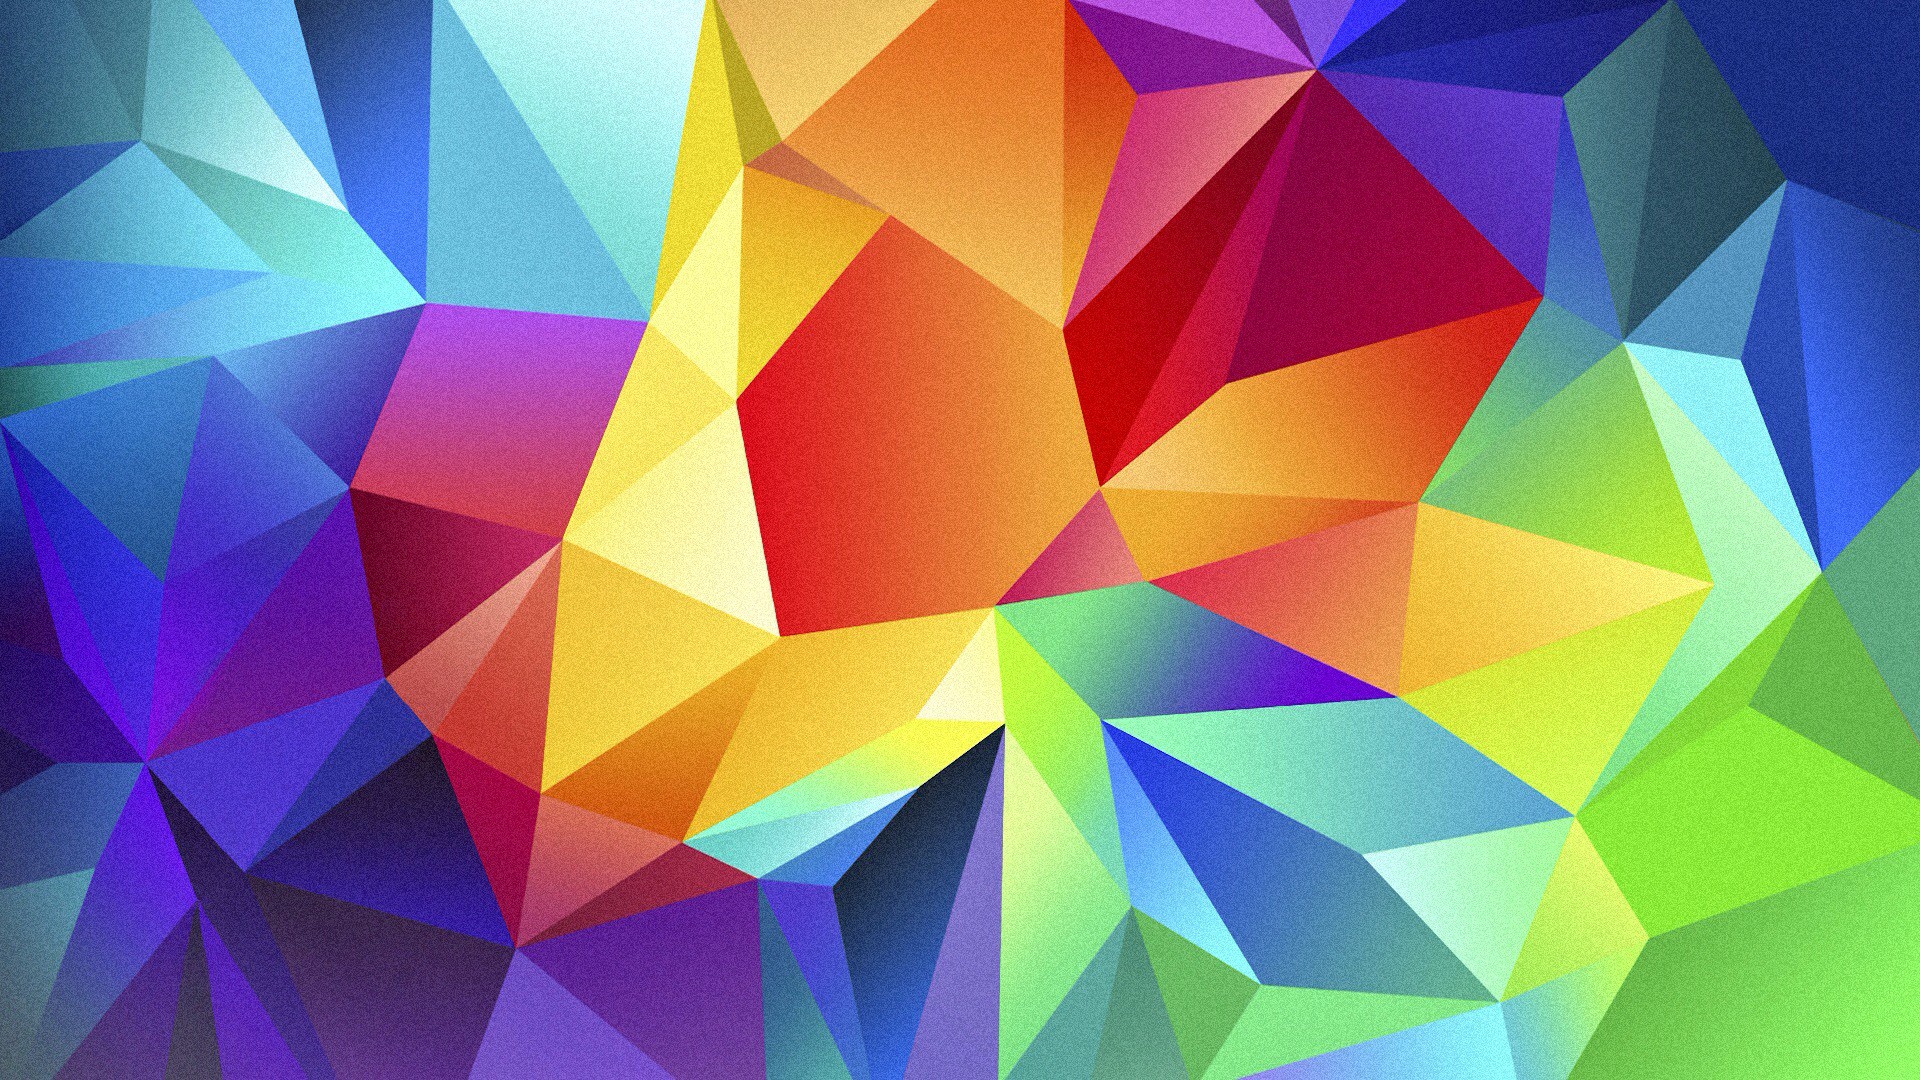 Free photo: Abstract colorful background - Abstract, Colorful, Design - Free Download - Jooinn